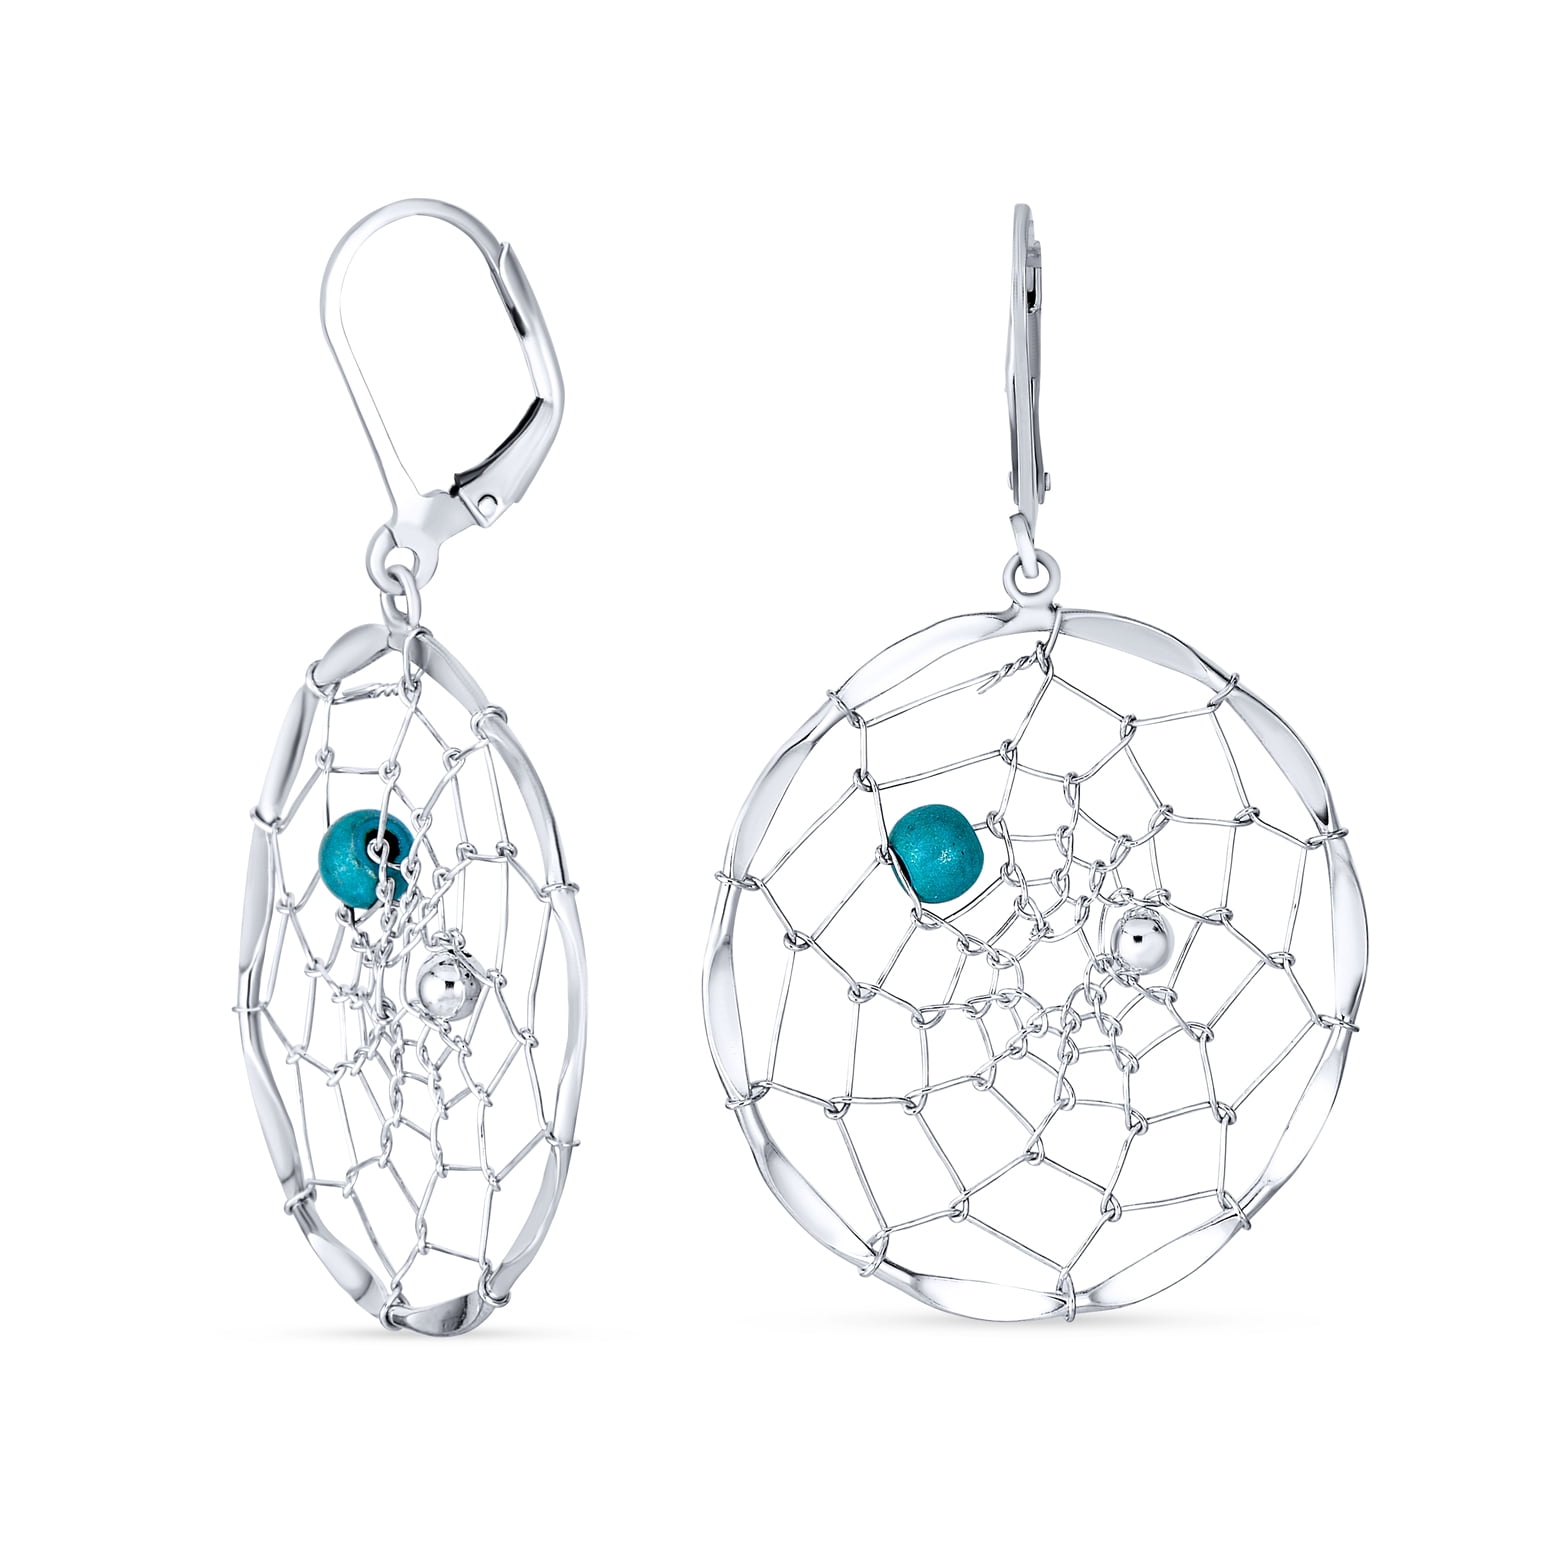 Earrings Ear Stud Dream Catcher with Turquoise Pearl and 2 Springs 925 Silver 